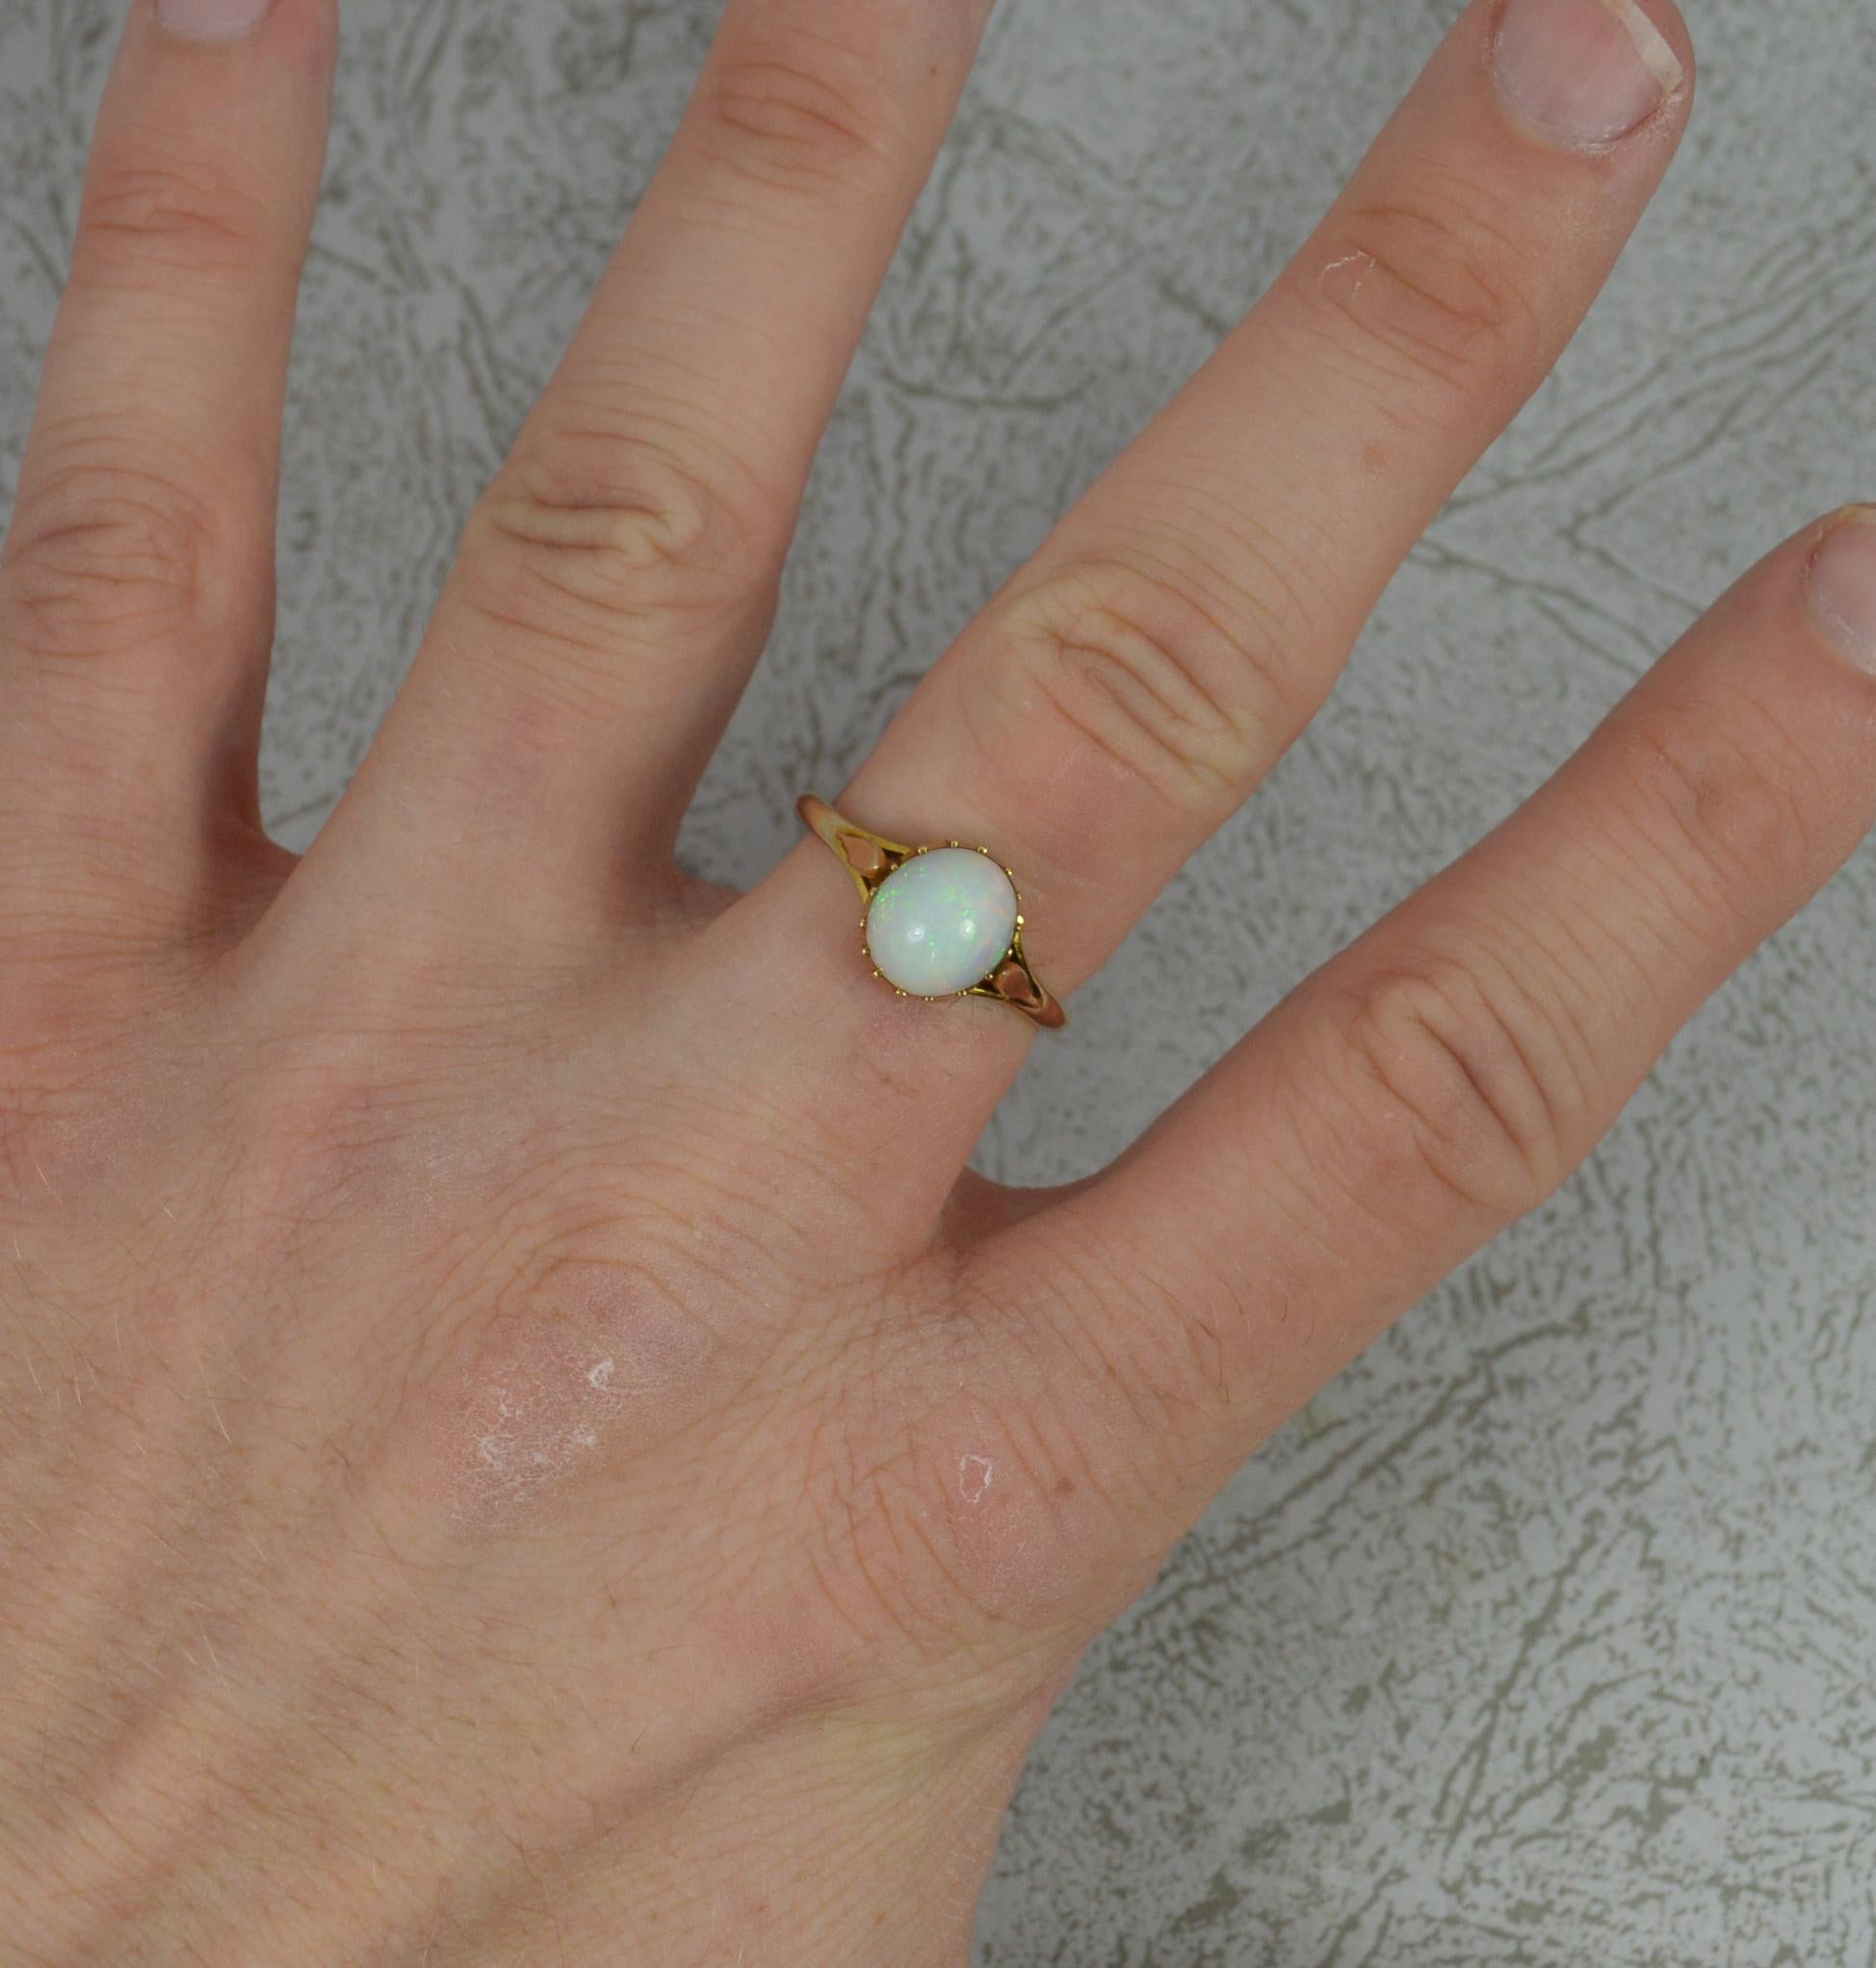 A fine opal and diamond ring, circa 1910.
Solid 18 carat yellow gold example.
Set with a single natural, oval shaped opal. 7.9mm x 8.9mm approx.

CONDITION ; Very good for age. Clean and solid band. Well set stone. Issue free. Please view